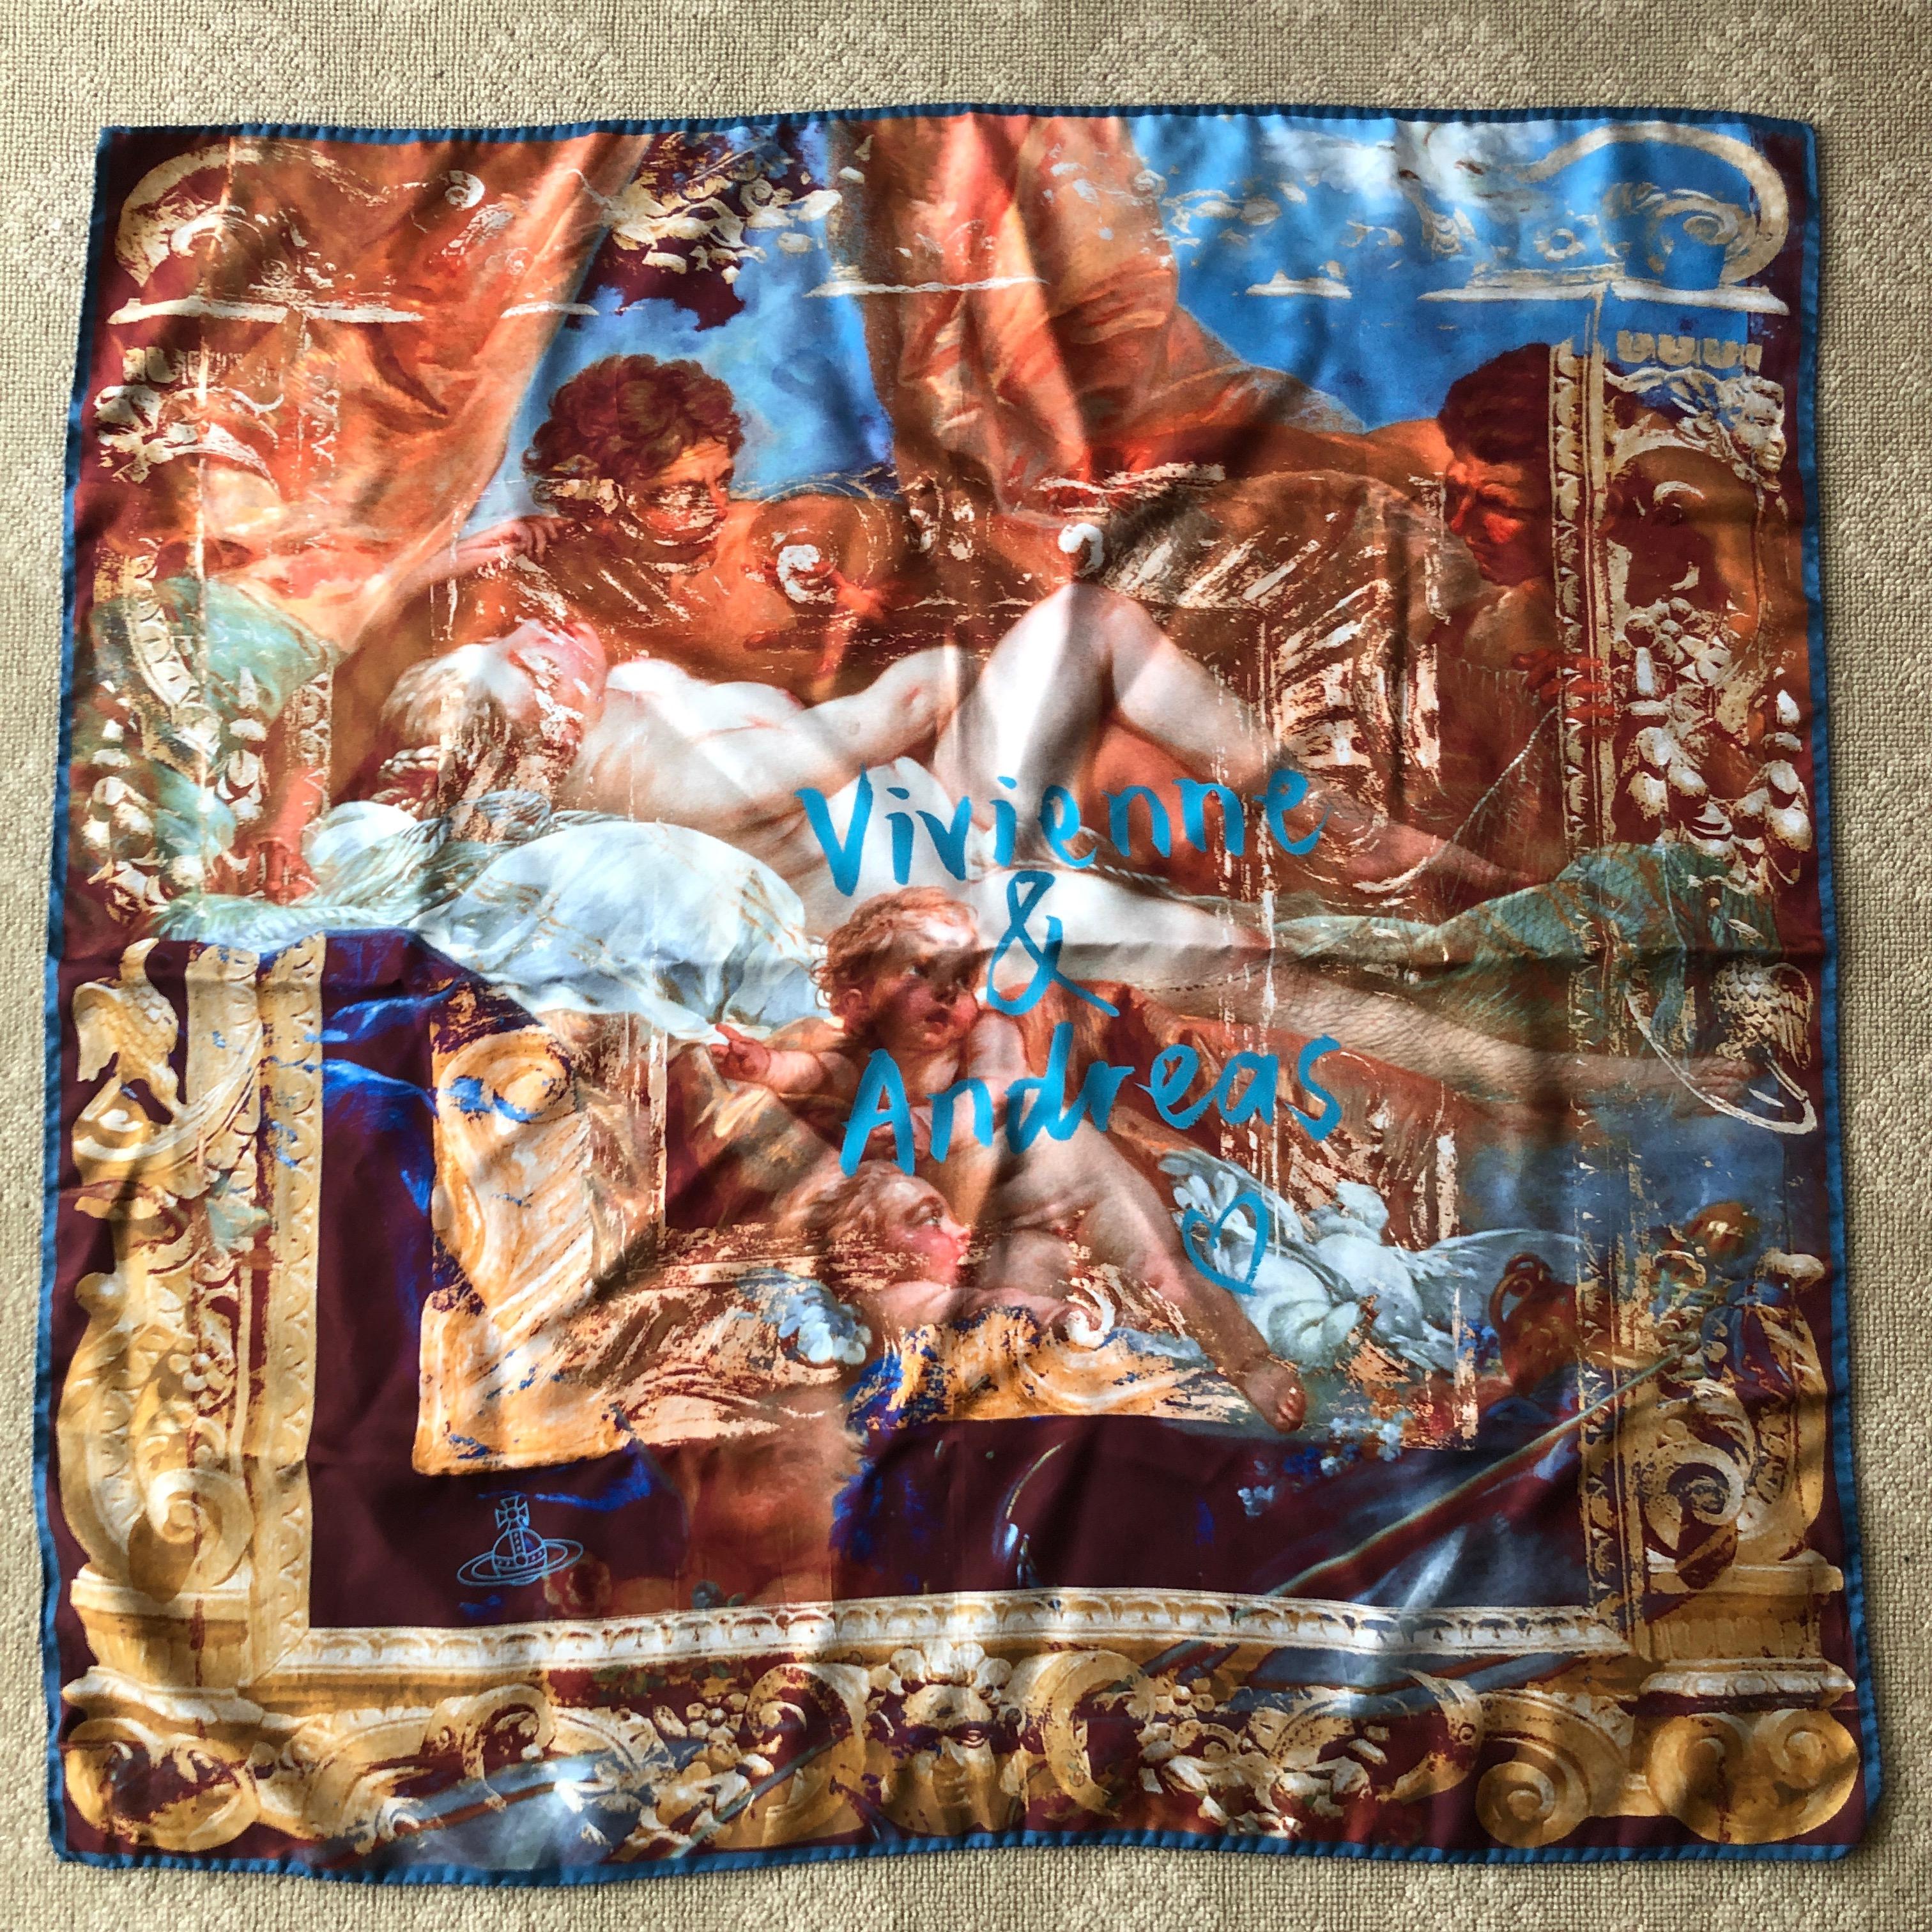 Vivienne Westwood Large Silk Scarf with Hand Rolled Edges
35